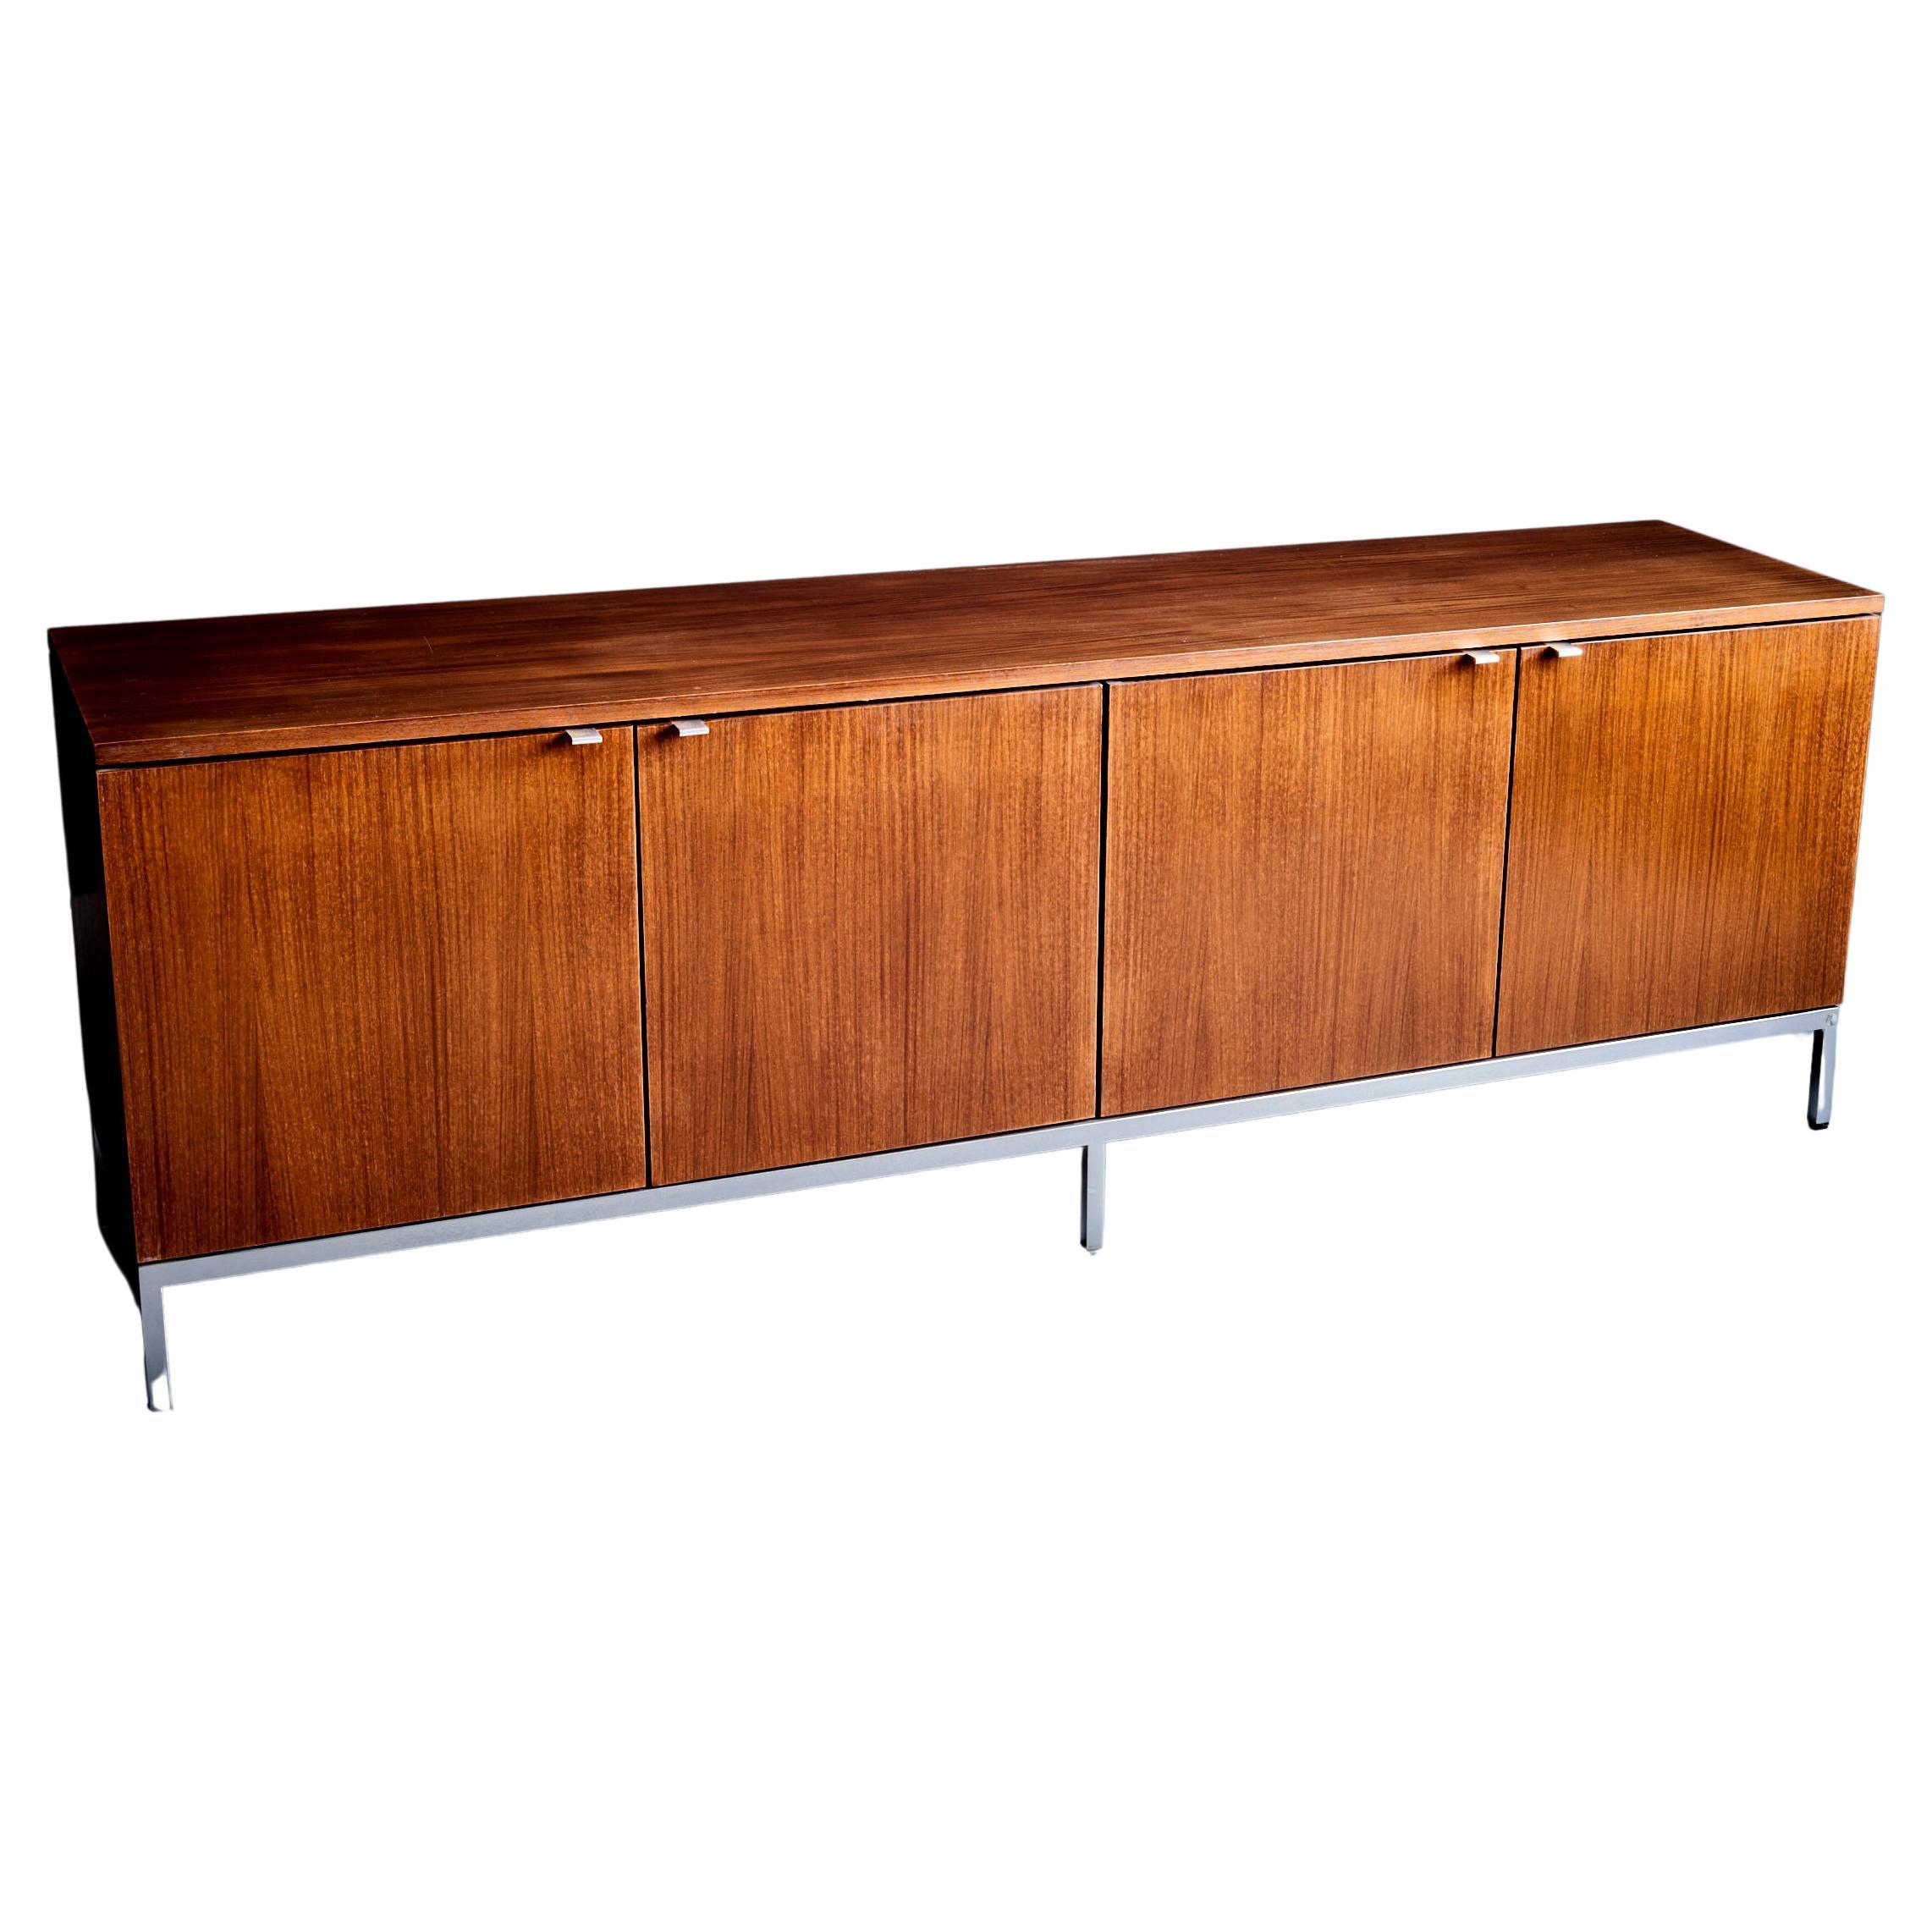 Knoll International Sideboard by Florence Knoll, Germany - 1970s   